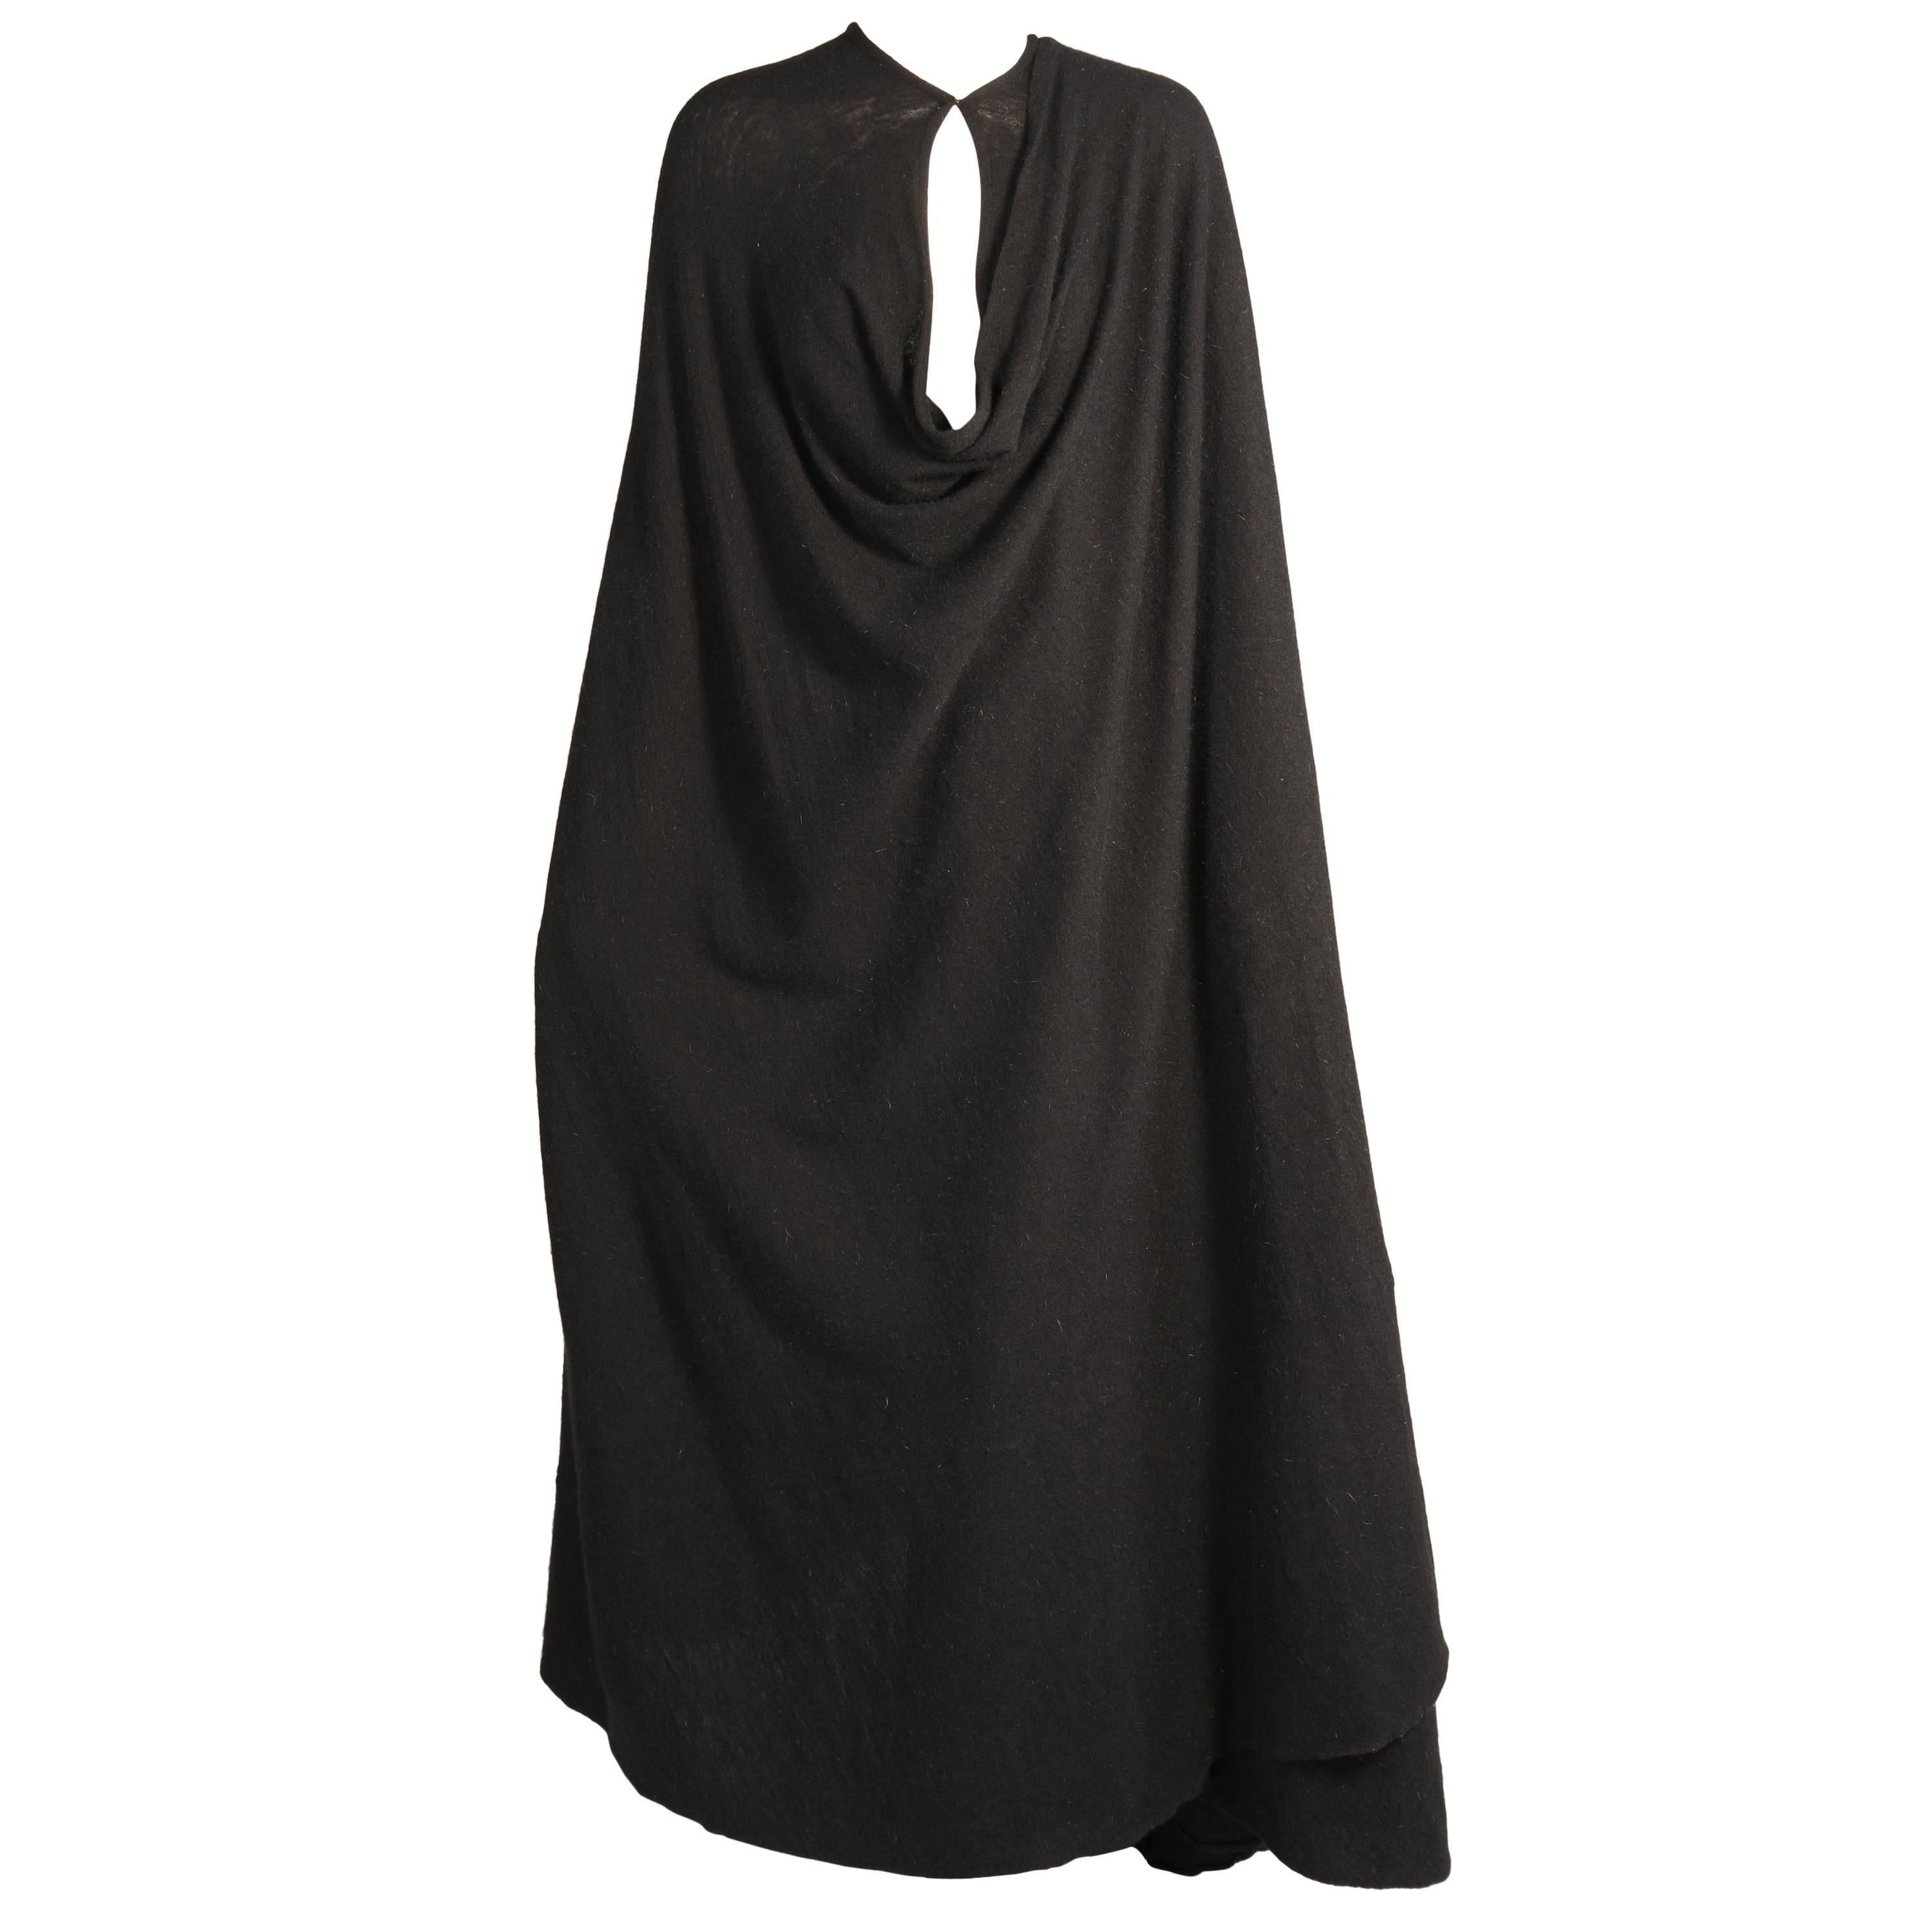 Madame Gres is famous for her draping and this fluid black angora and wool blend evening cape is a spectacular example of her work. The cape is made from a luxuriously soft fabric and it has a single hook and fabric eye closure and only three seams.